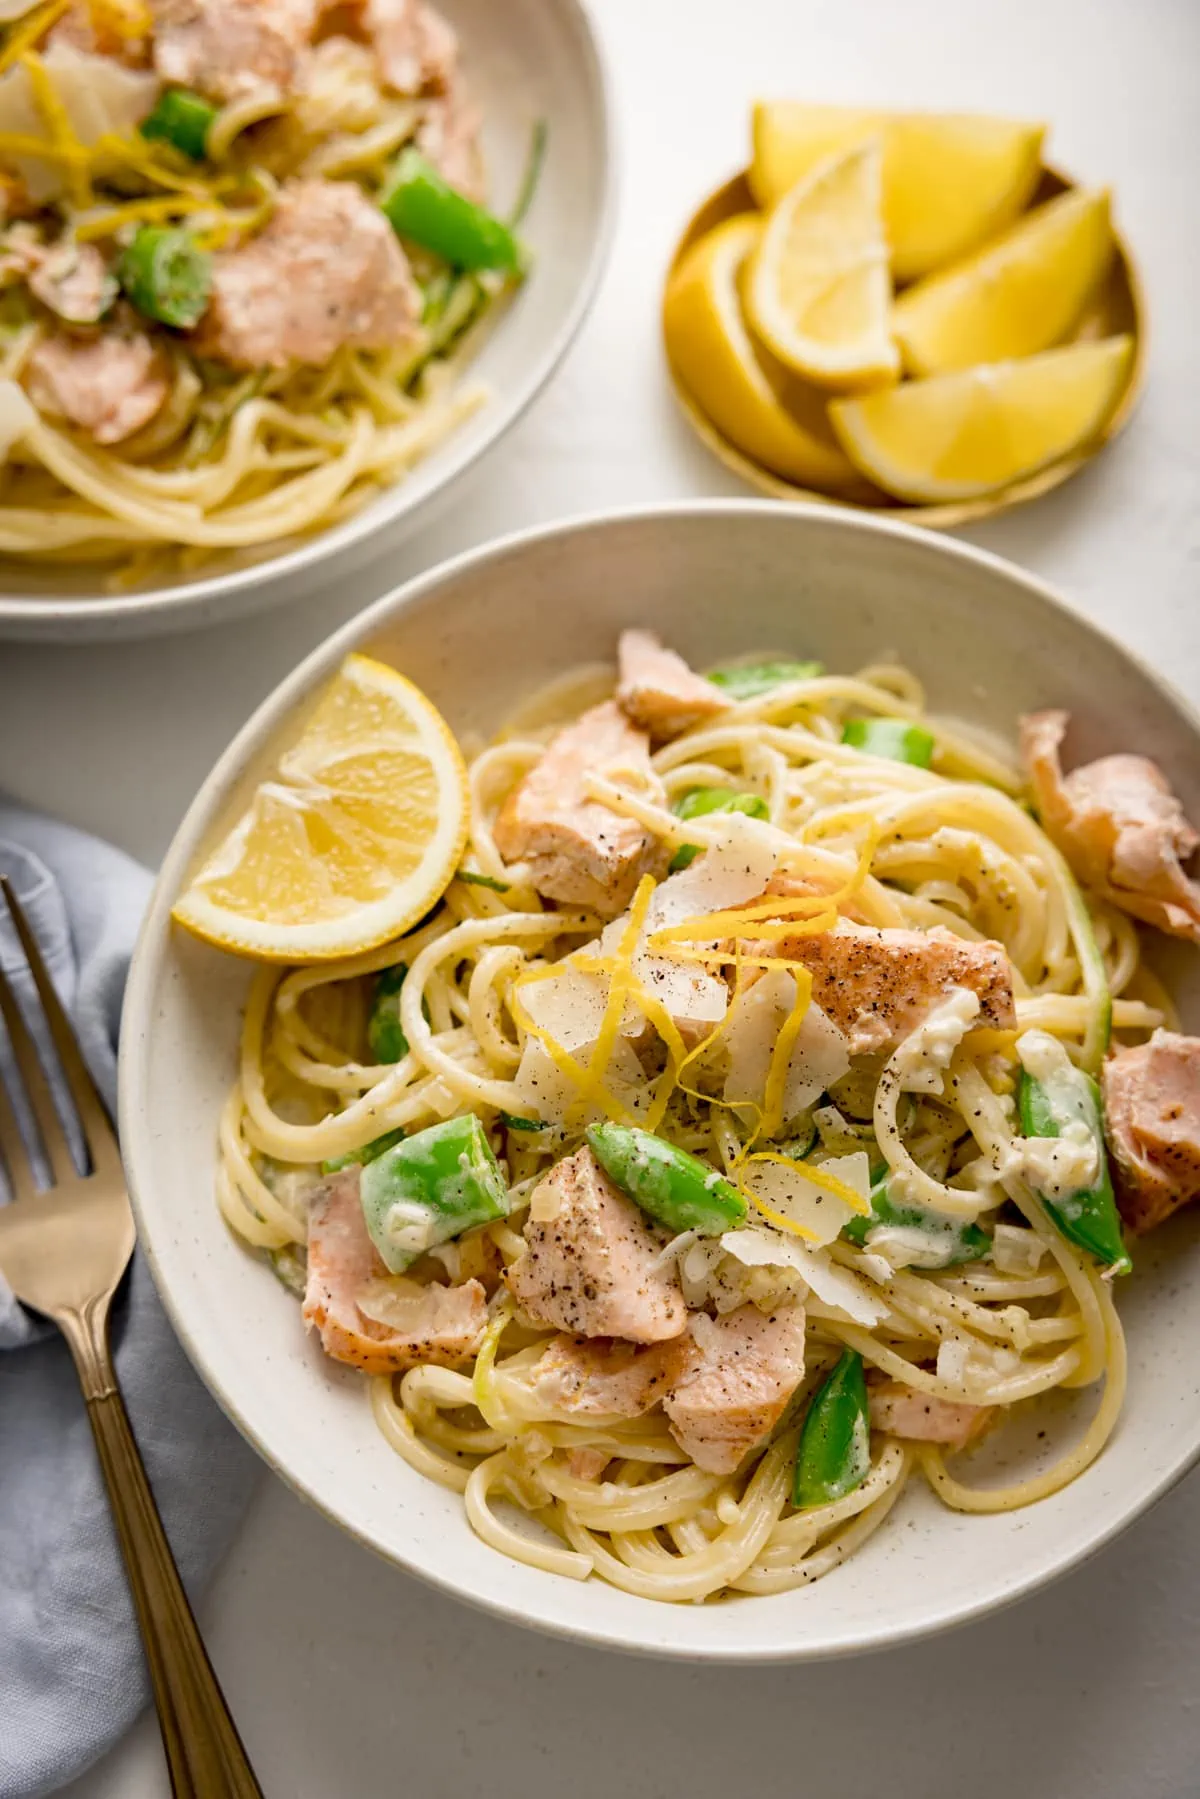 Overhead of salmon and spaghetti in a creamy lemon sauce in a white bowl with a lemon wedge in the bowl. The bowl is on a white background next to a small dish of lemon wedges. There is a further bowl of pasta, a fork and a napkin nearby.